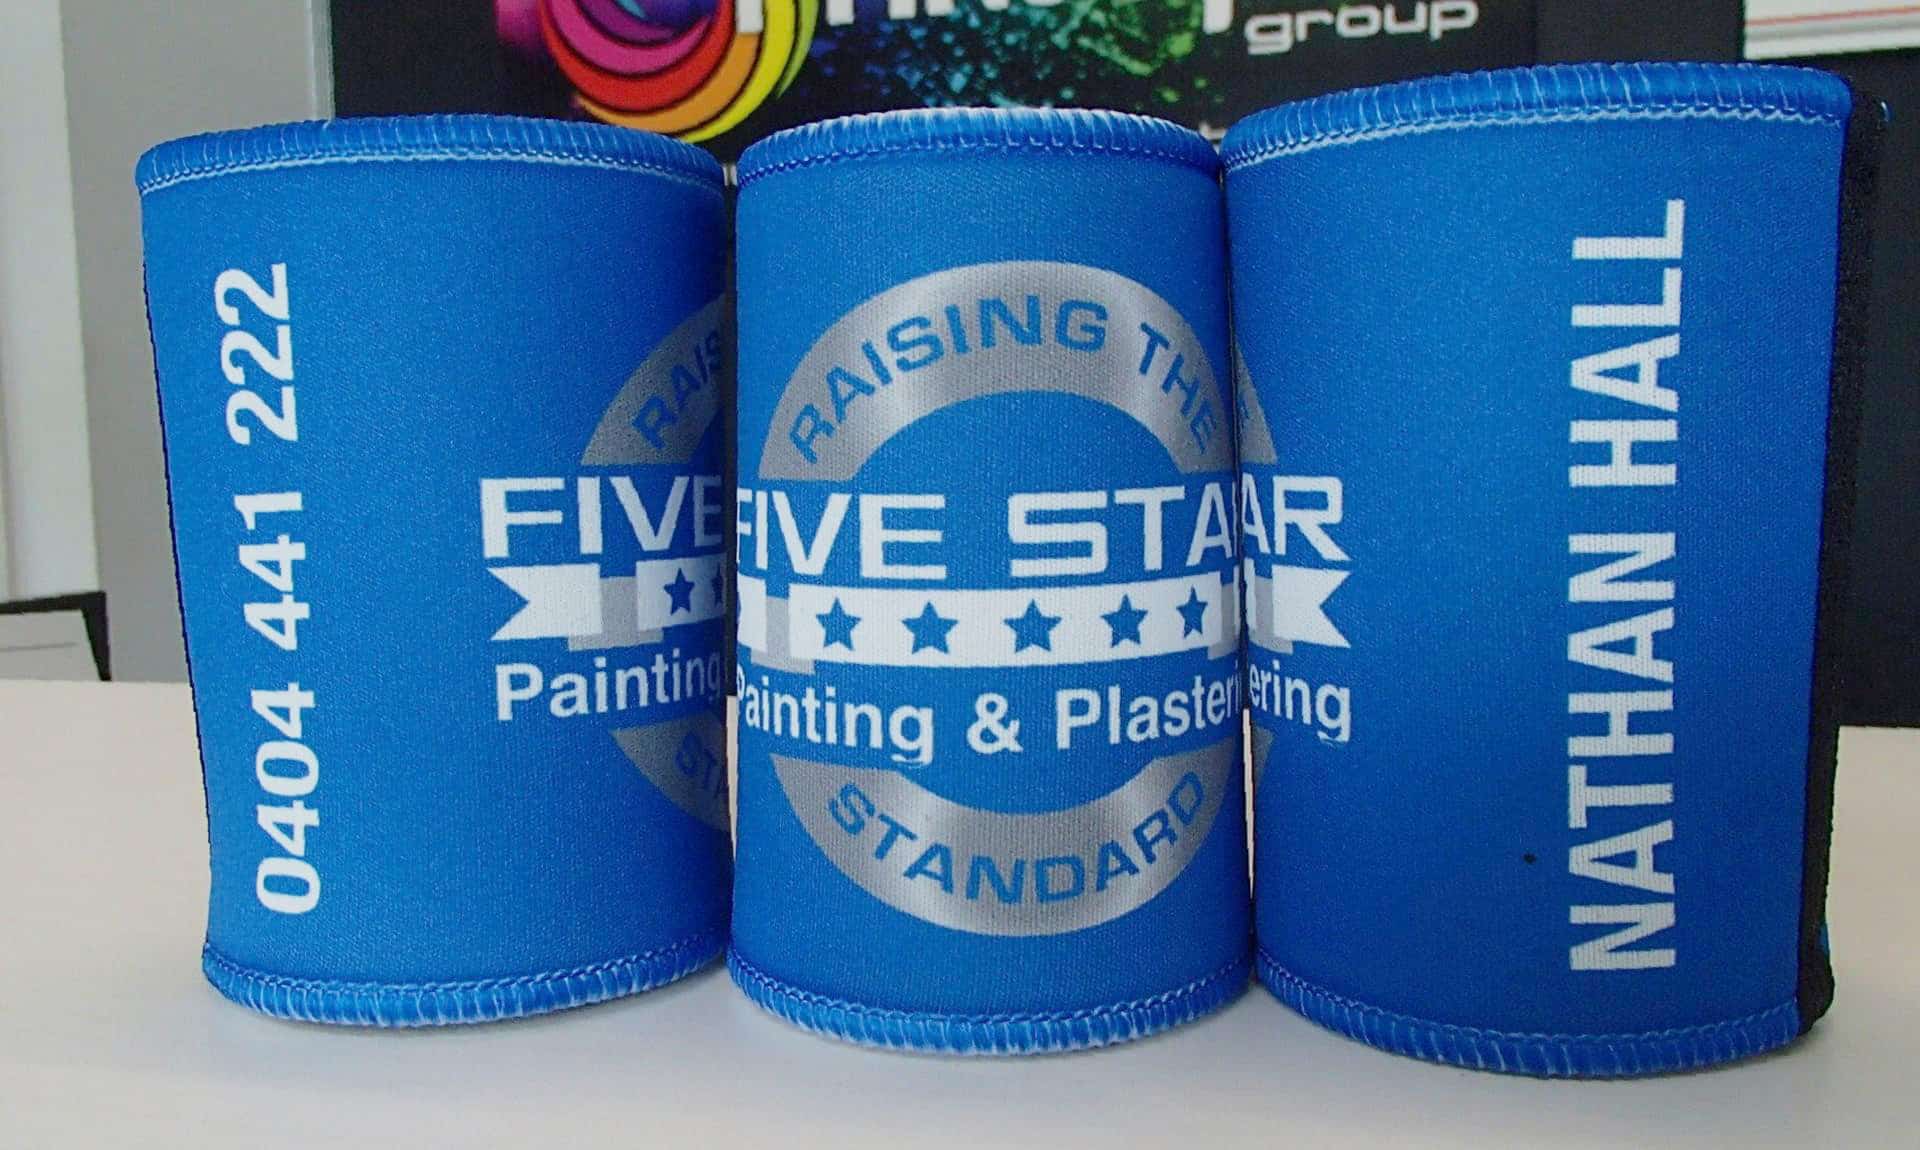 coaster - can holders - Printing Services in South Murwillumbah,NSW